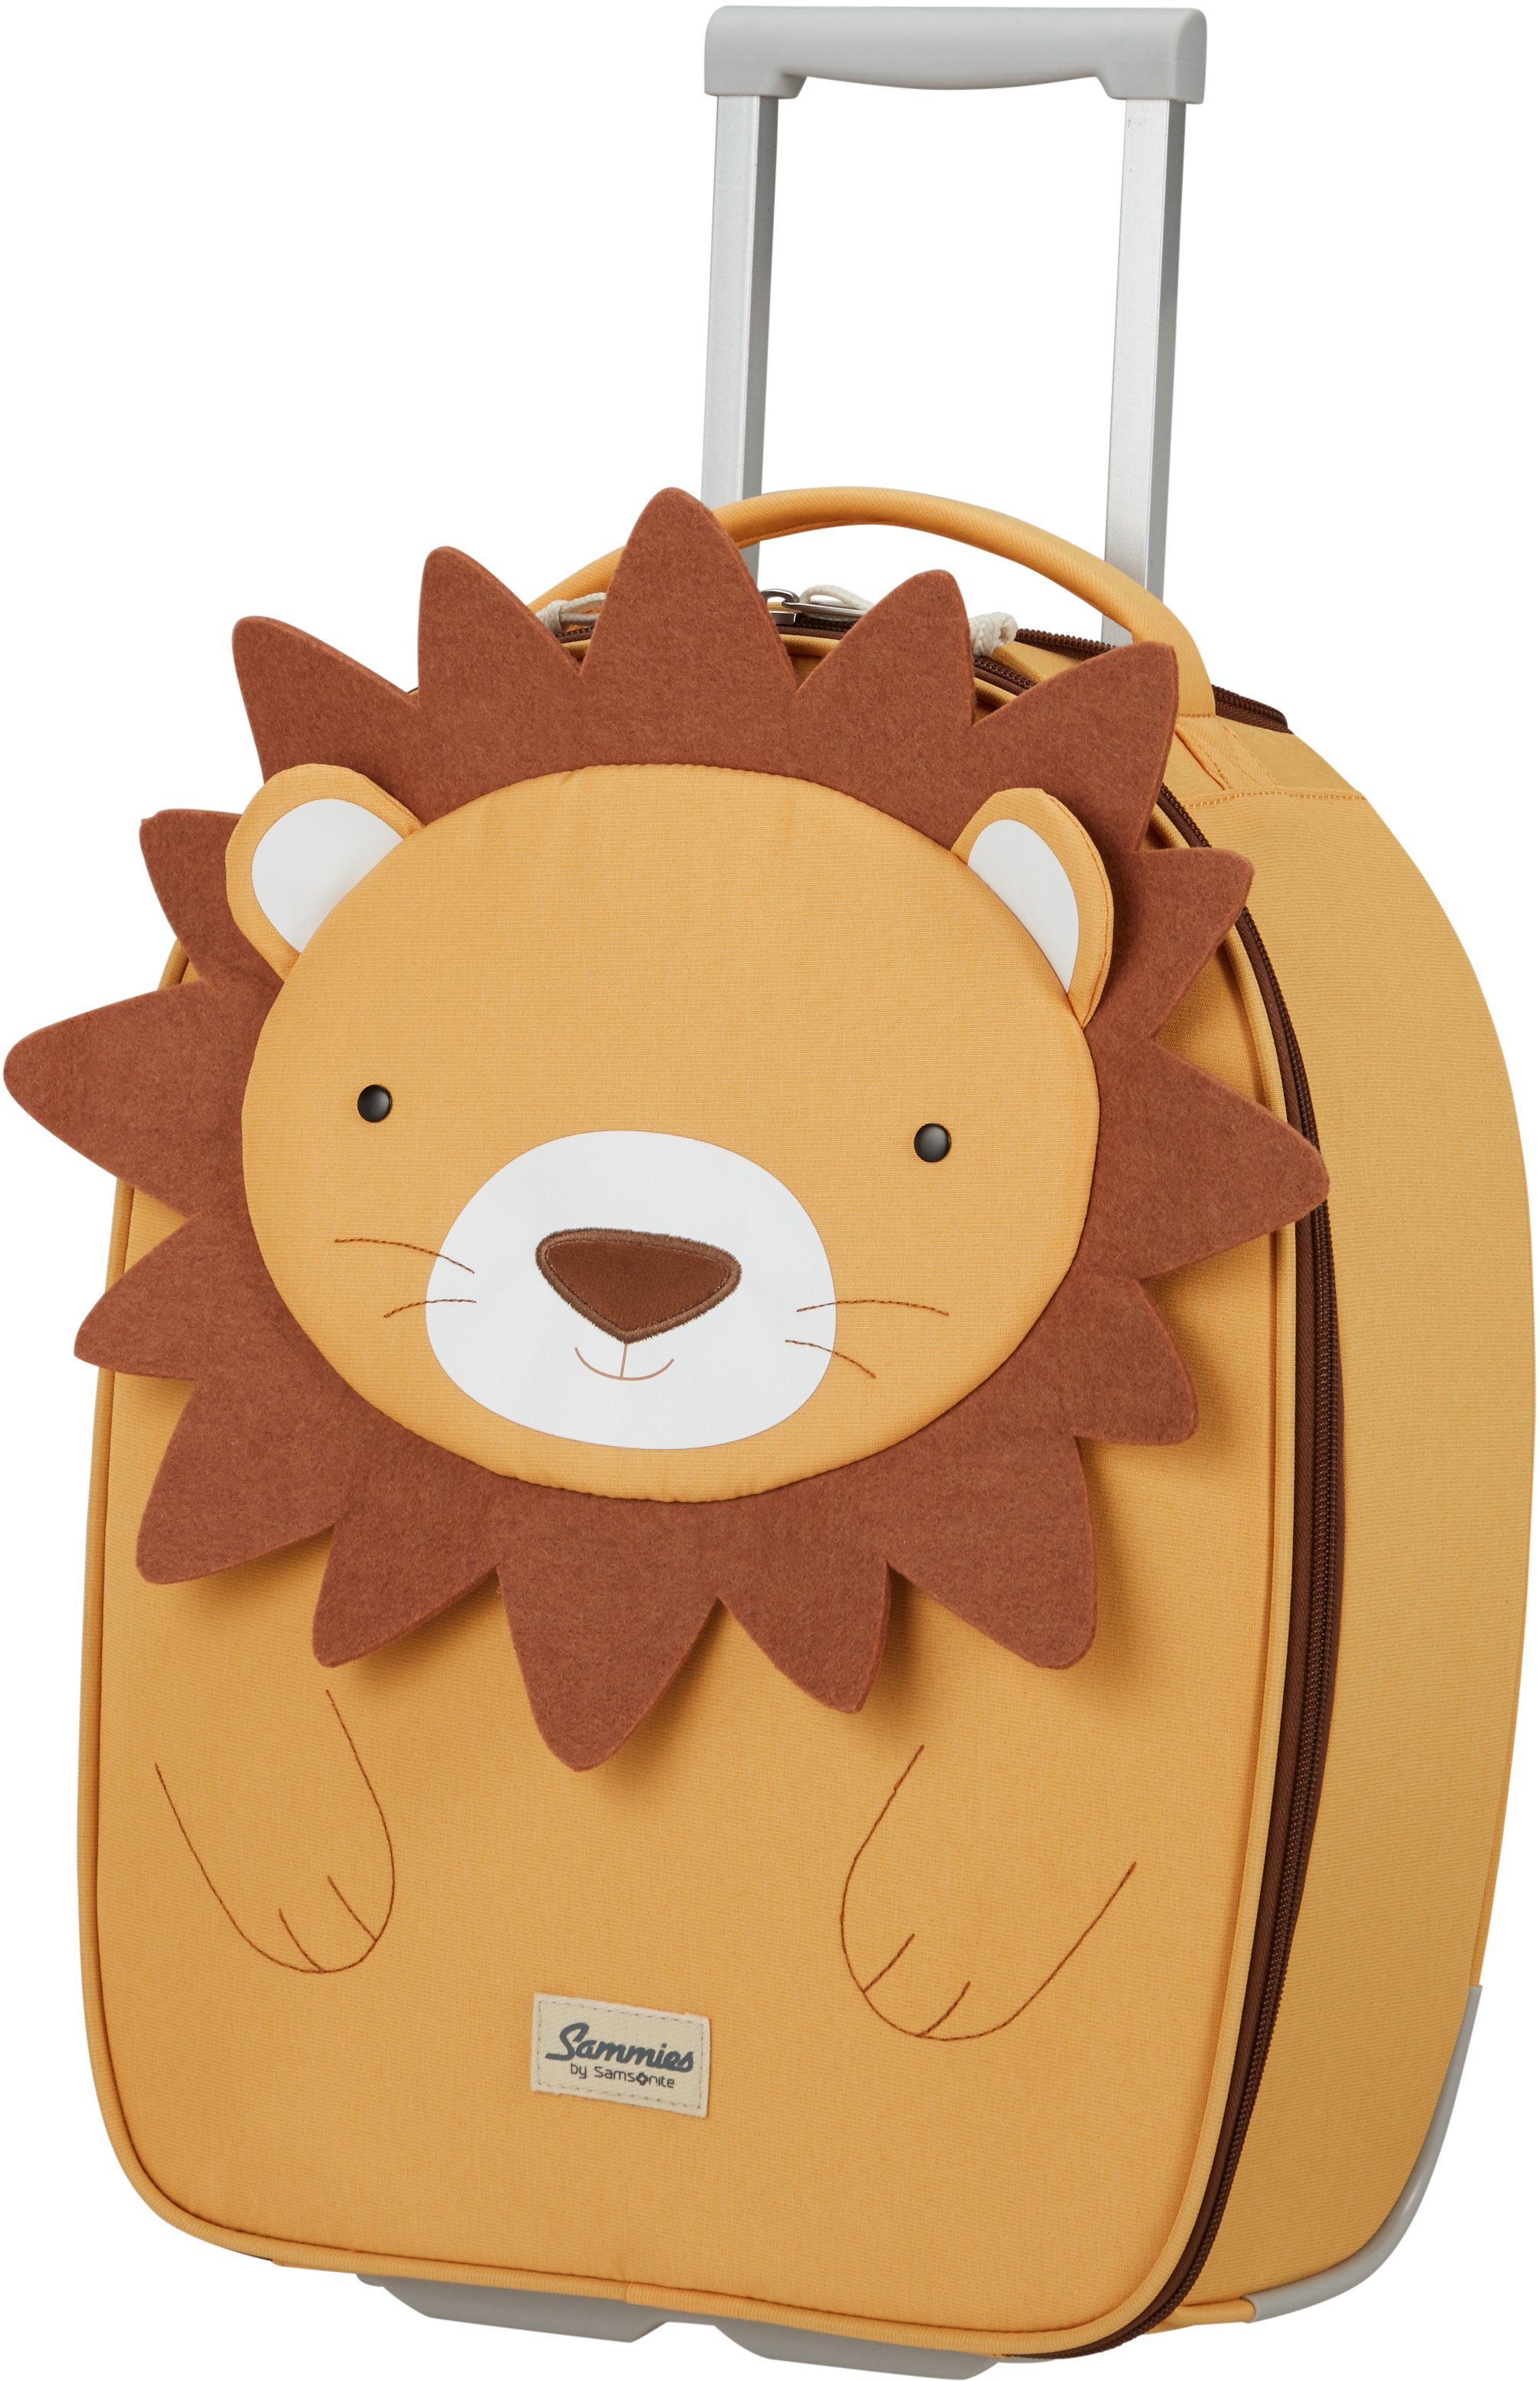 Kinderkoffer Rollen, Lion ECO, Sammies 2 Samsonite aus Lester, recyceltem Material Happy